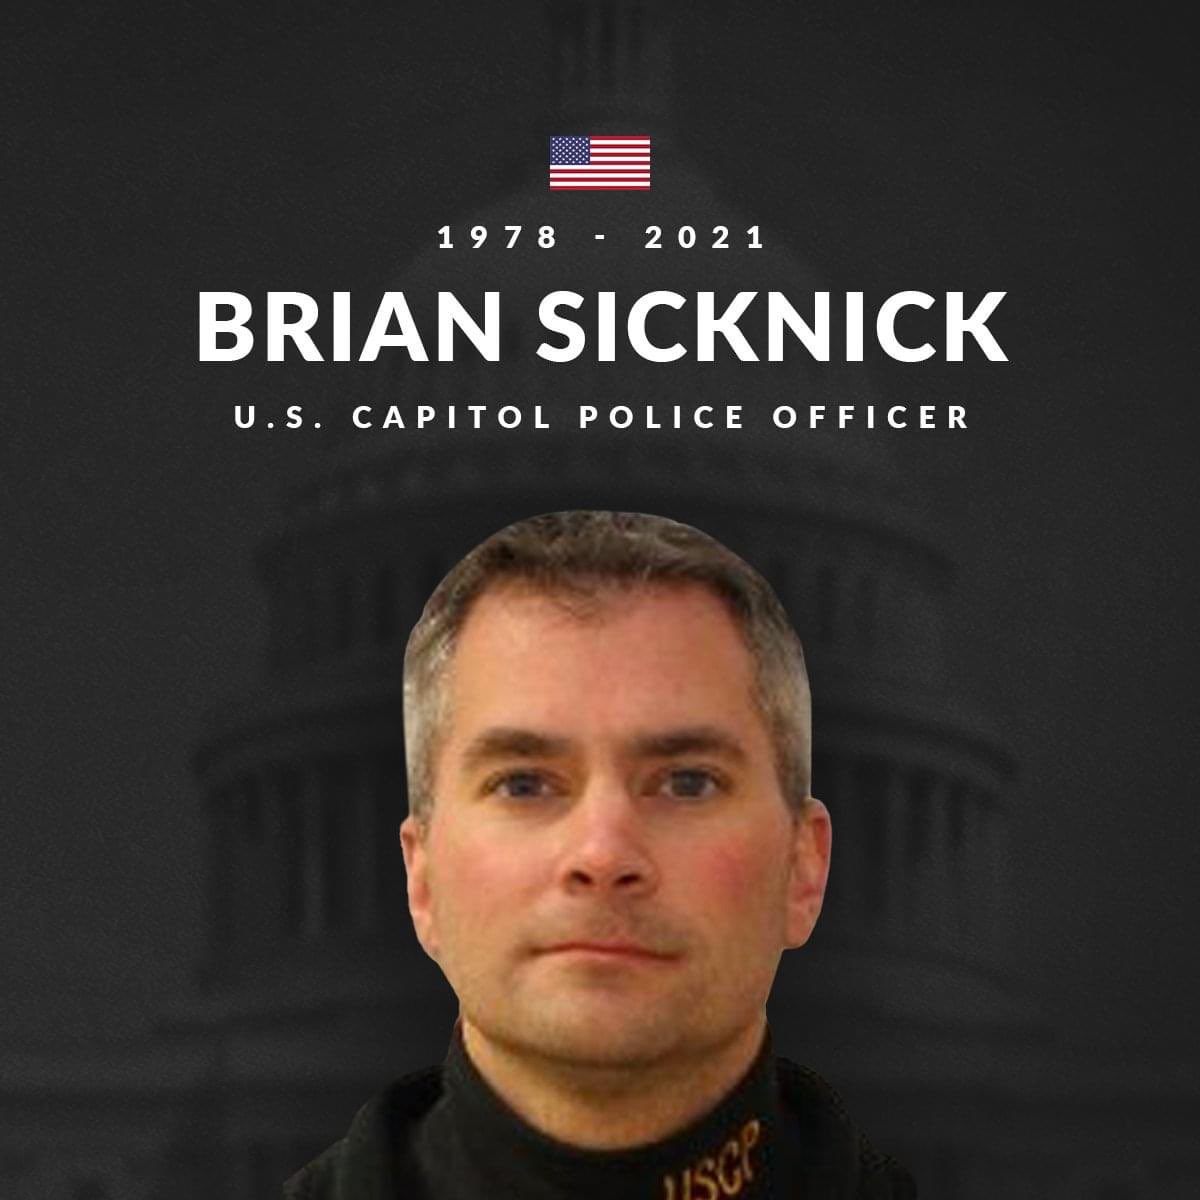 #NEVERFORGET #BrianSicknick 
Never, ever forget this man.
Never forget what Trump tried to do. What MAGA tried to do.
What the GOP continues to lie about and defend.
#ProudBlue #DemVoice1